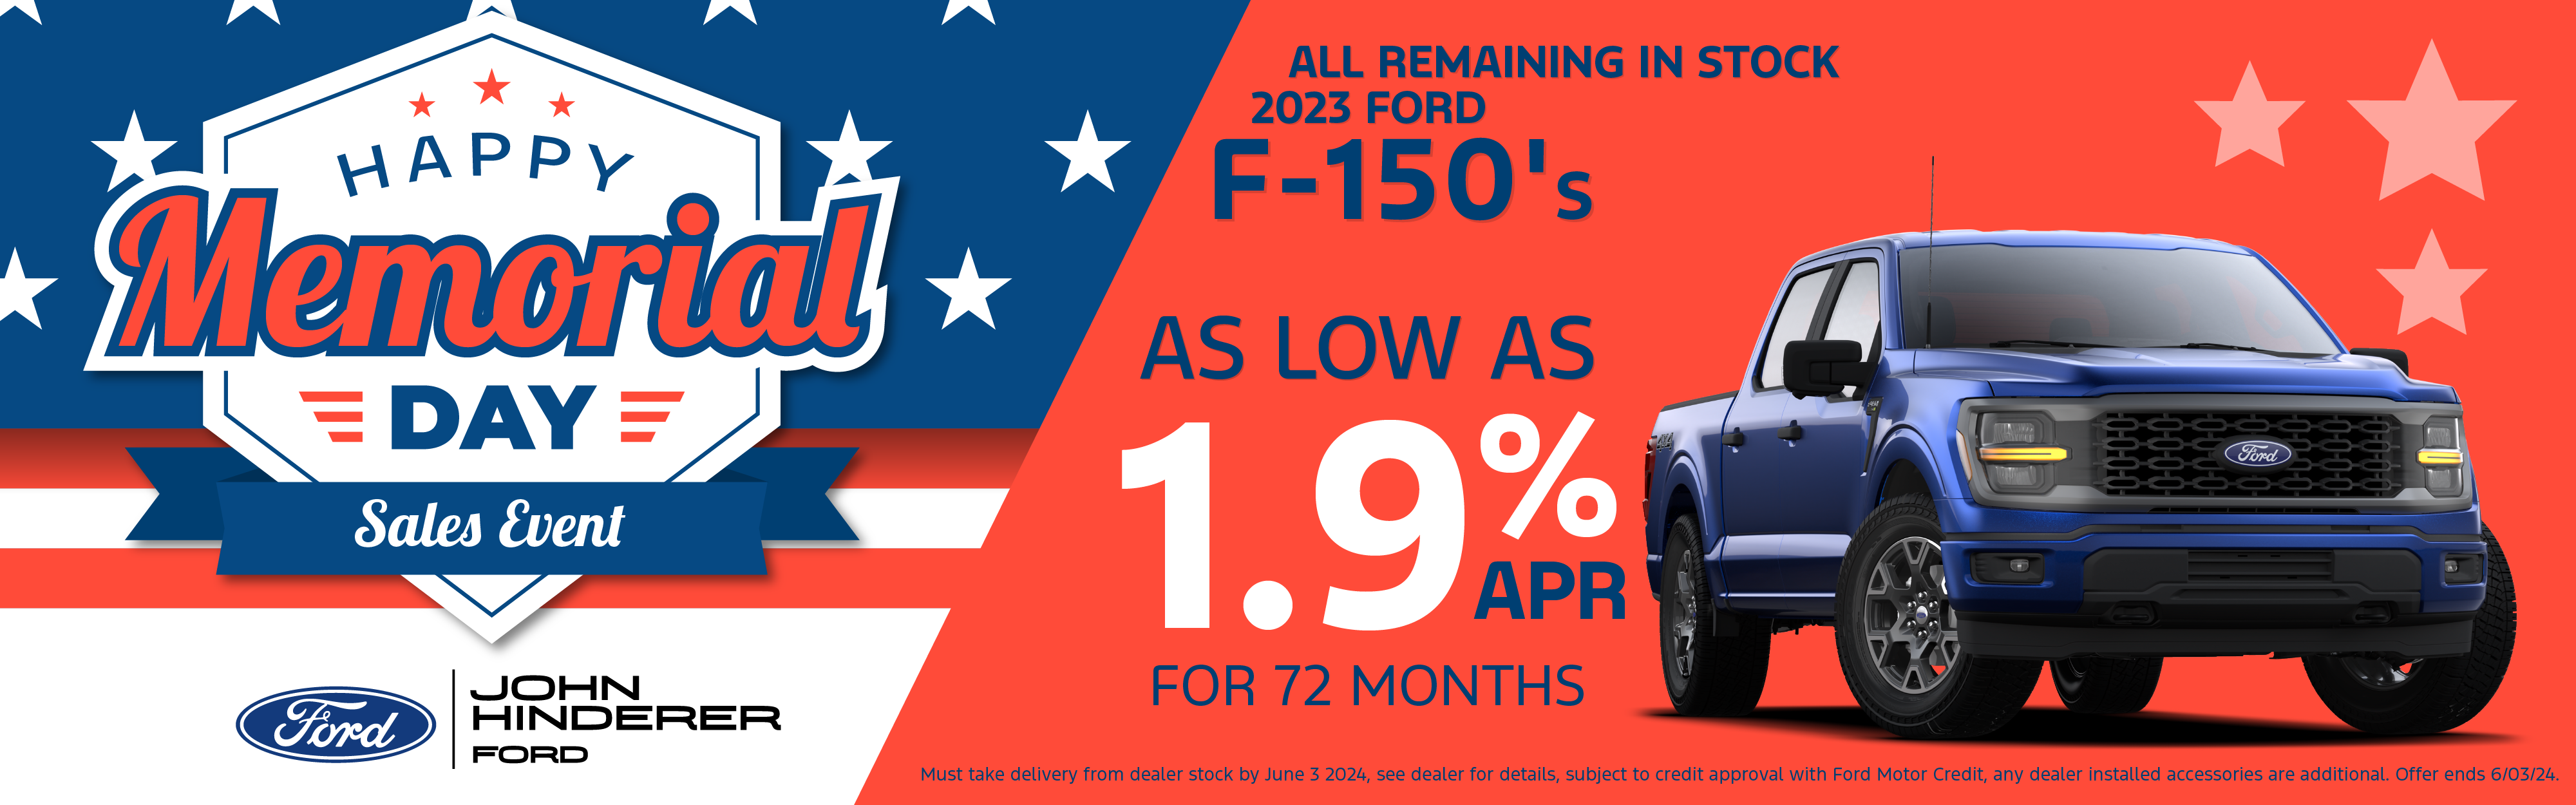 As low as 1.9% APR for 72 months on 2023 F-150s